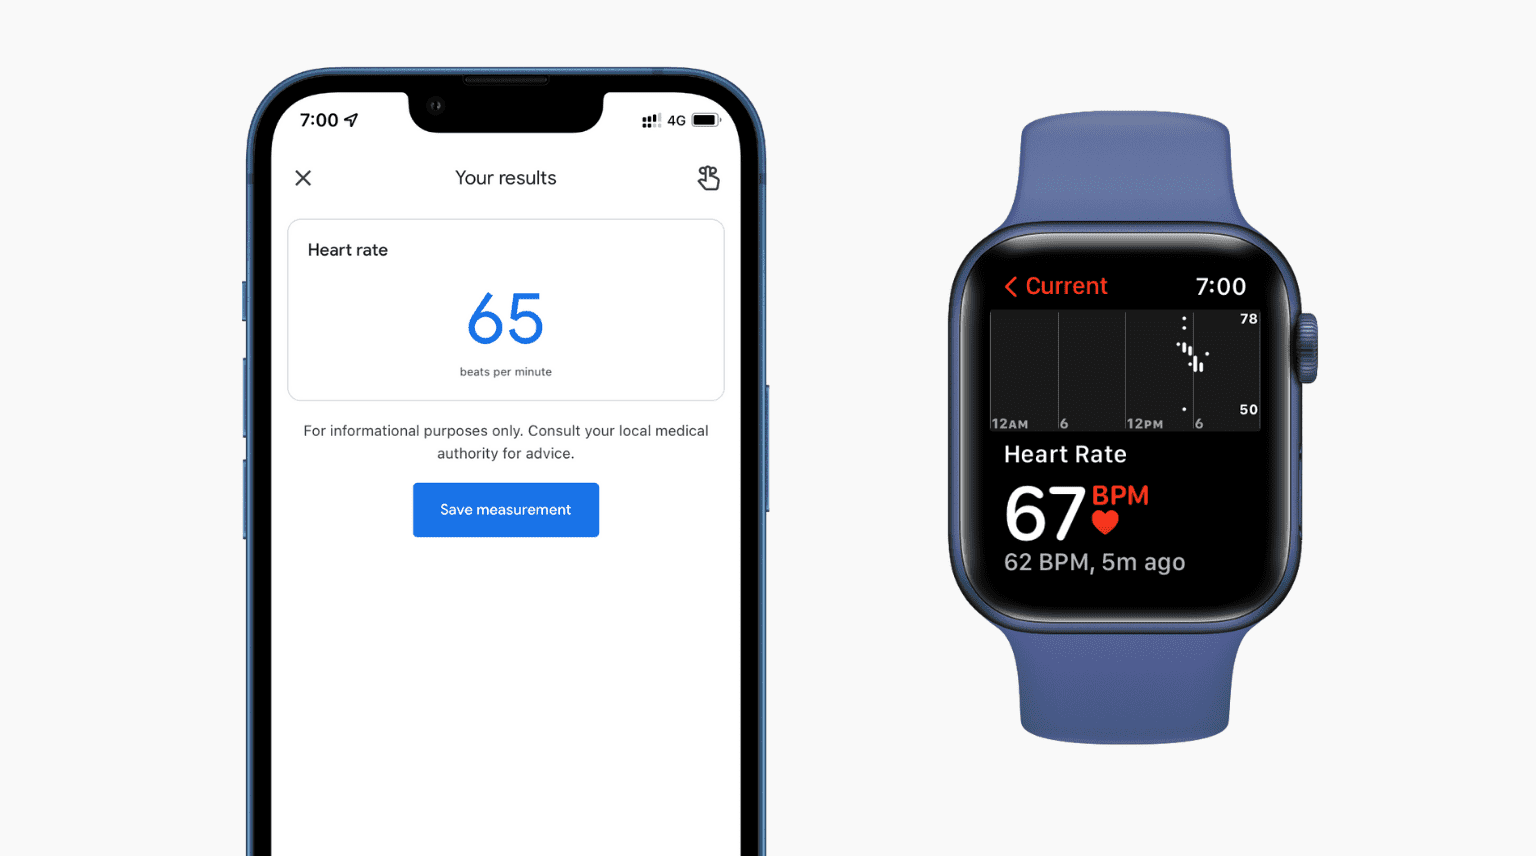 Heart rate from Google Fit and Apple Watch at 7 PM